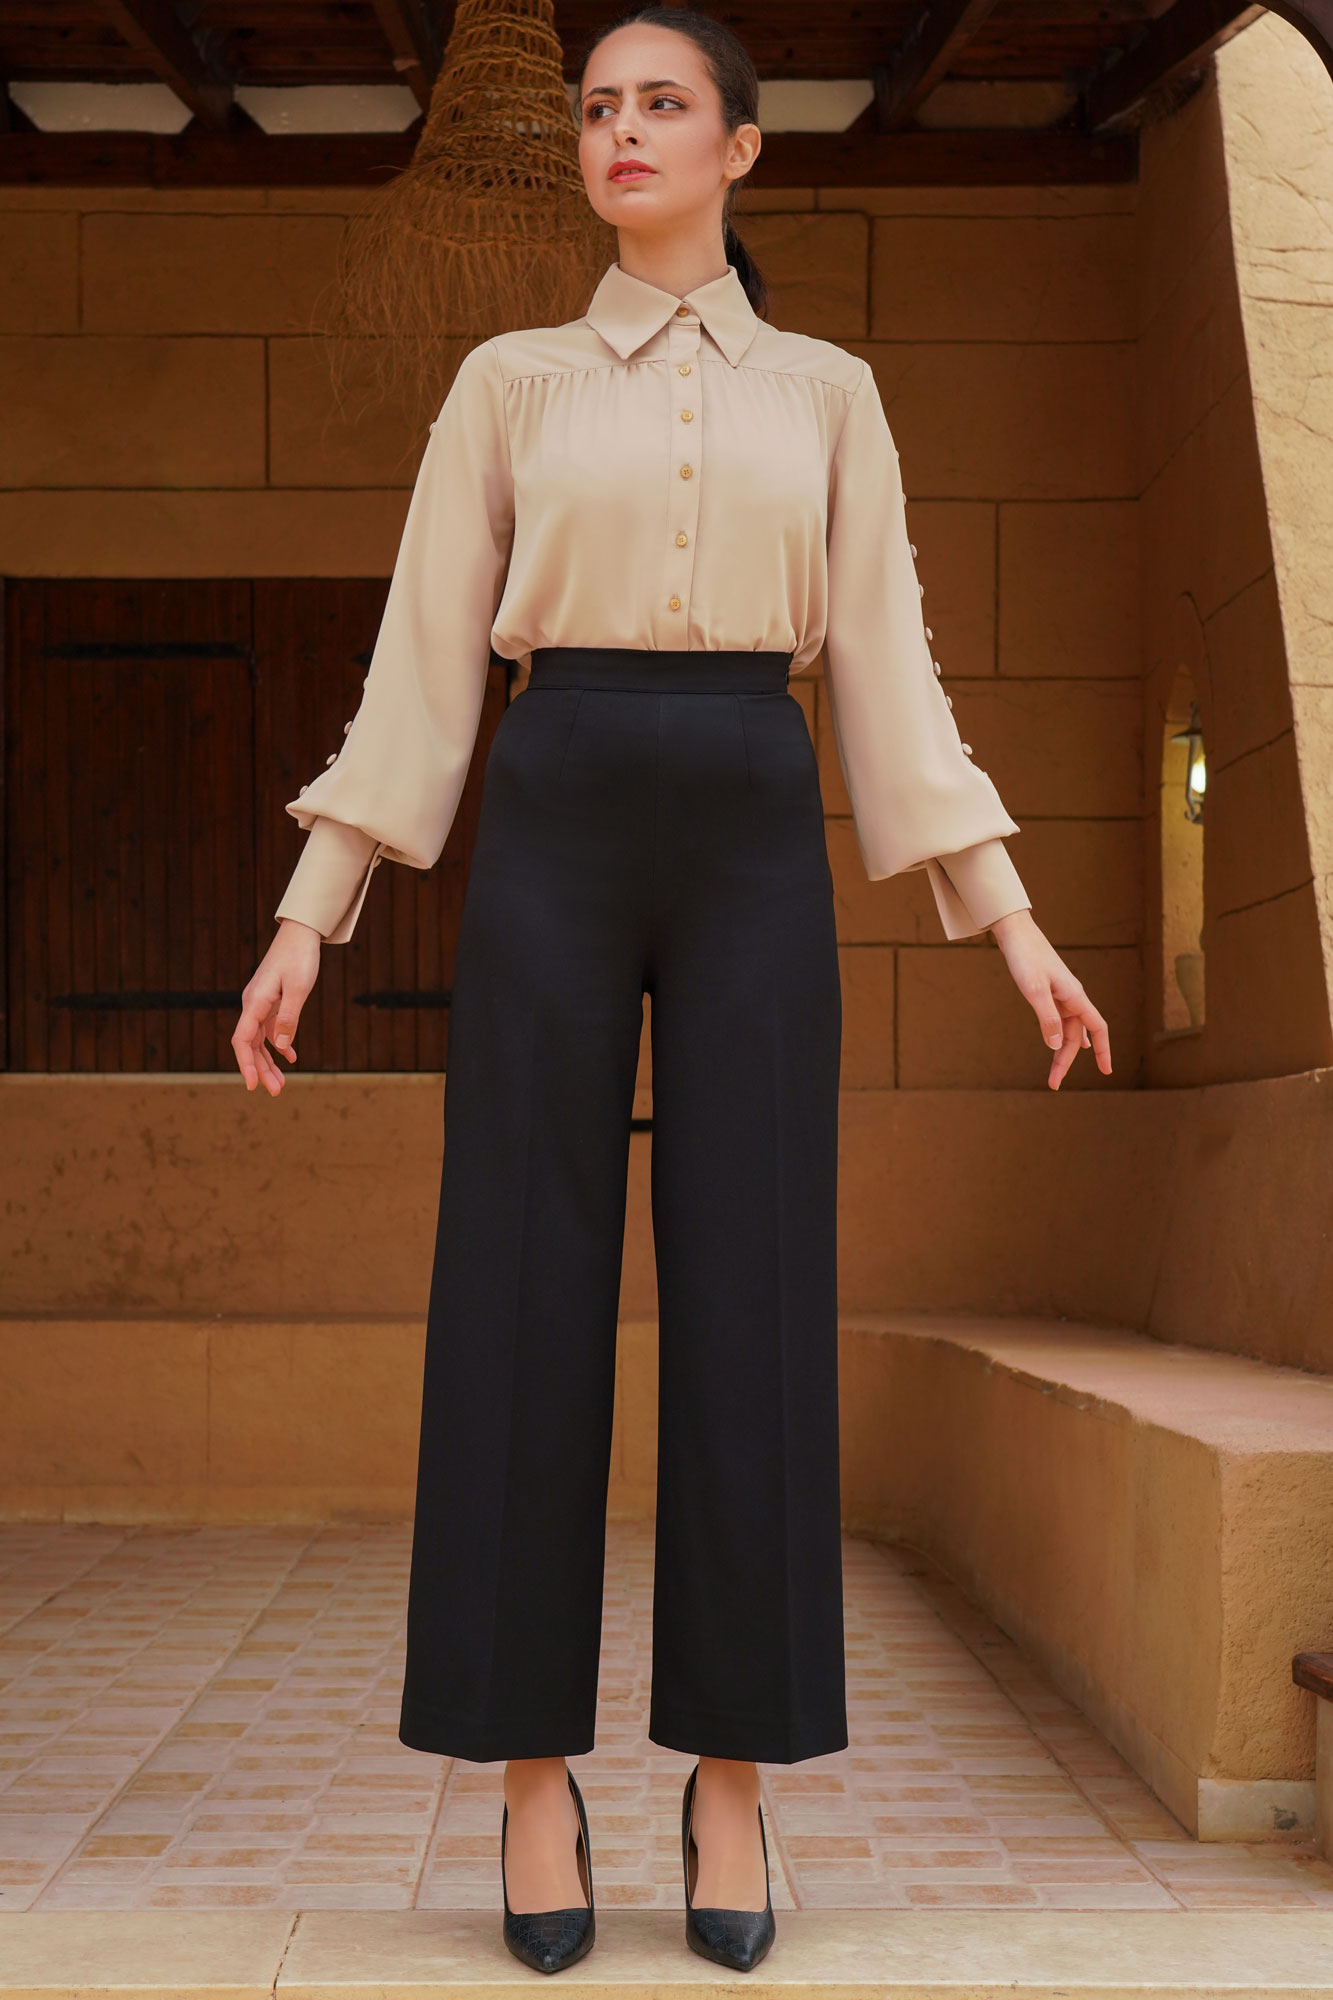 Two Pieces Ivory Shirt With Buttons And Black Pants